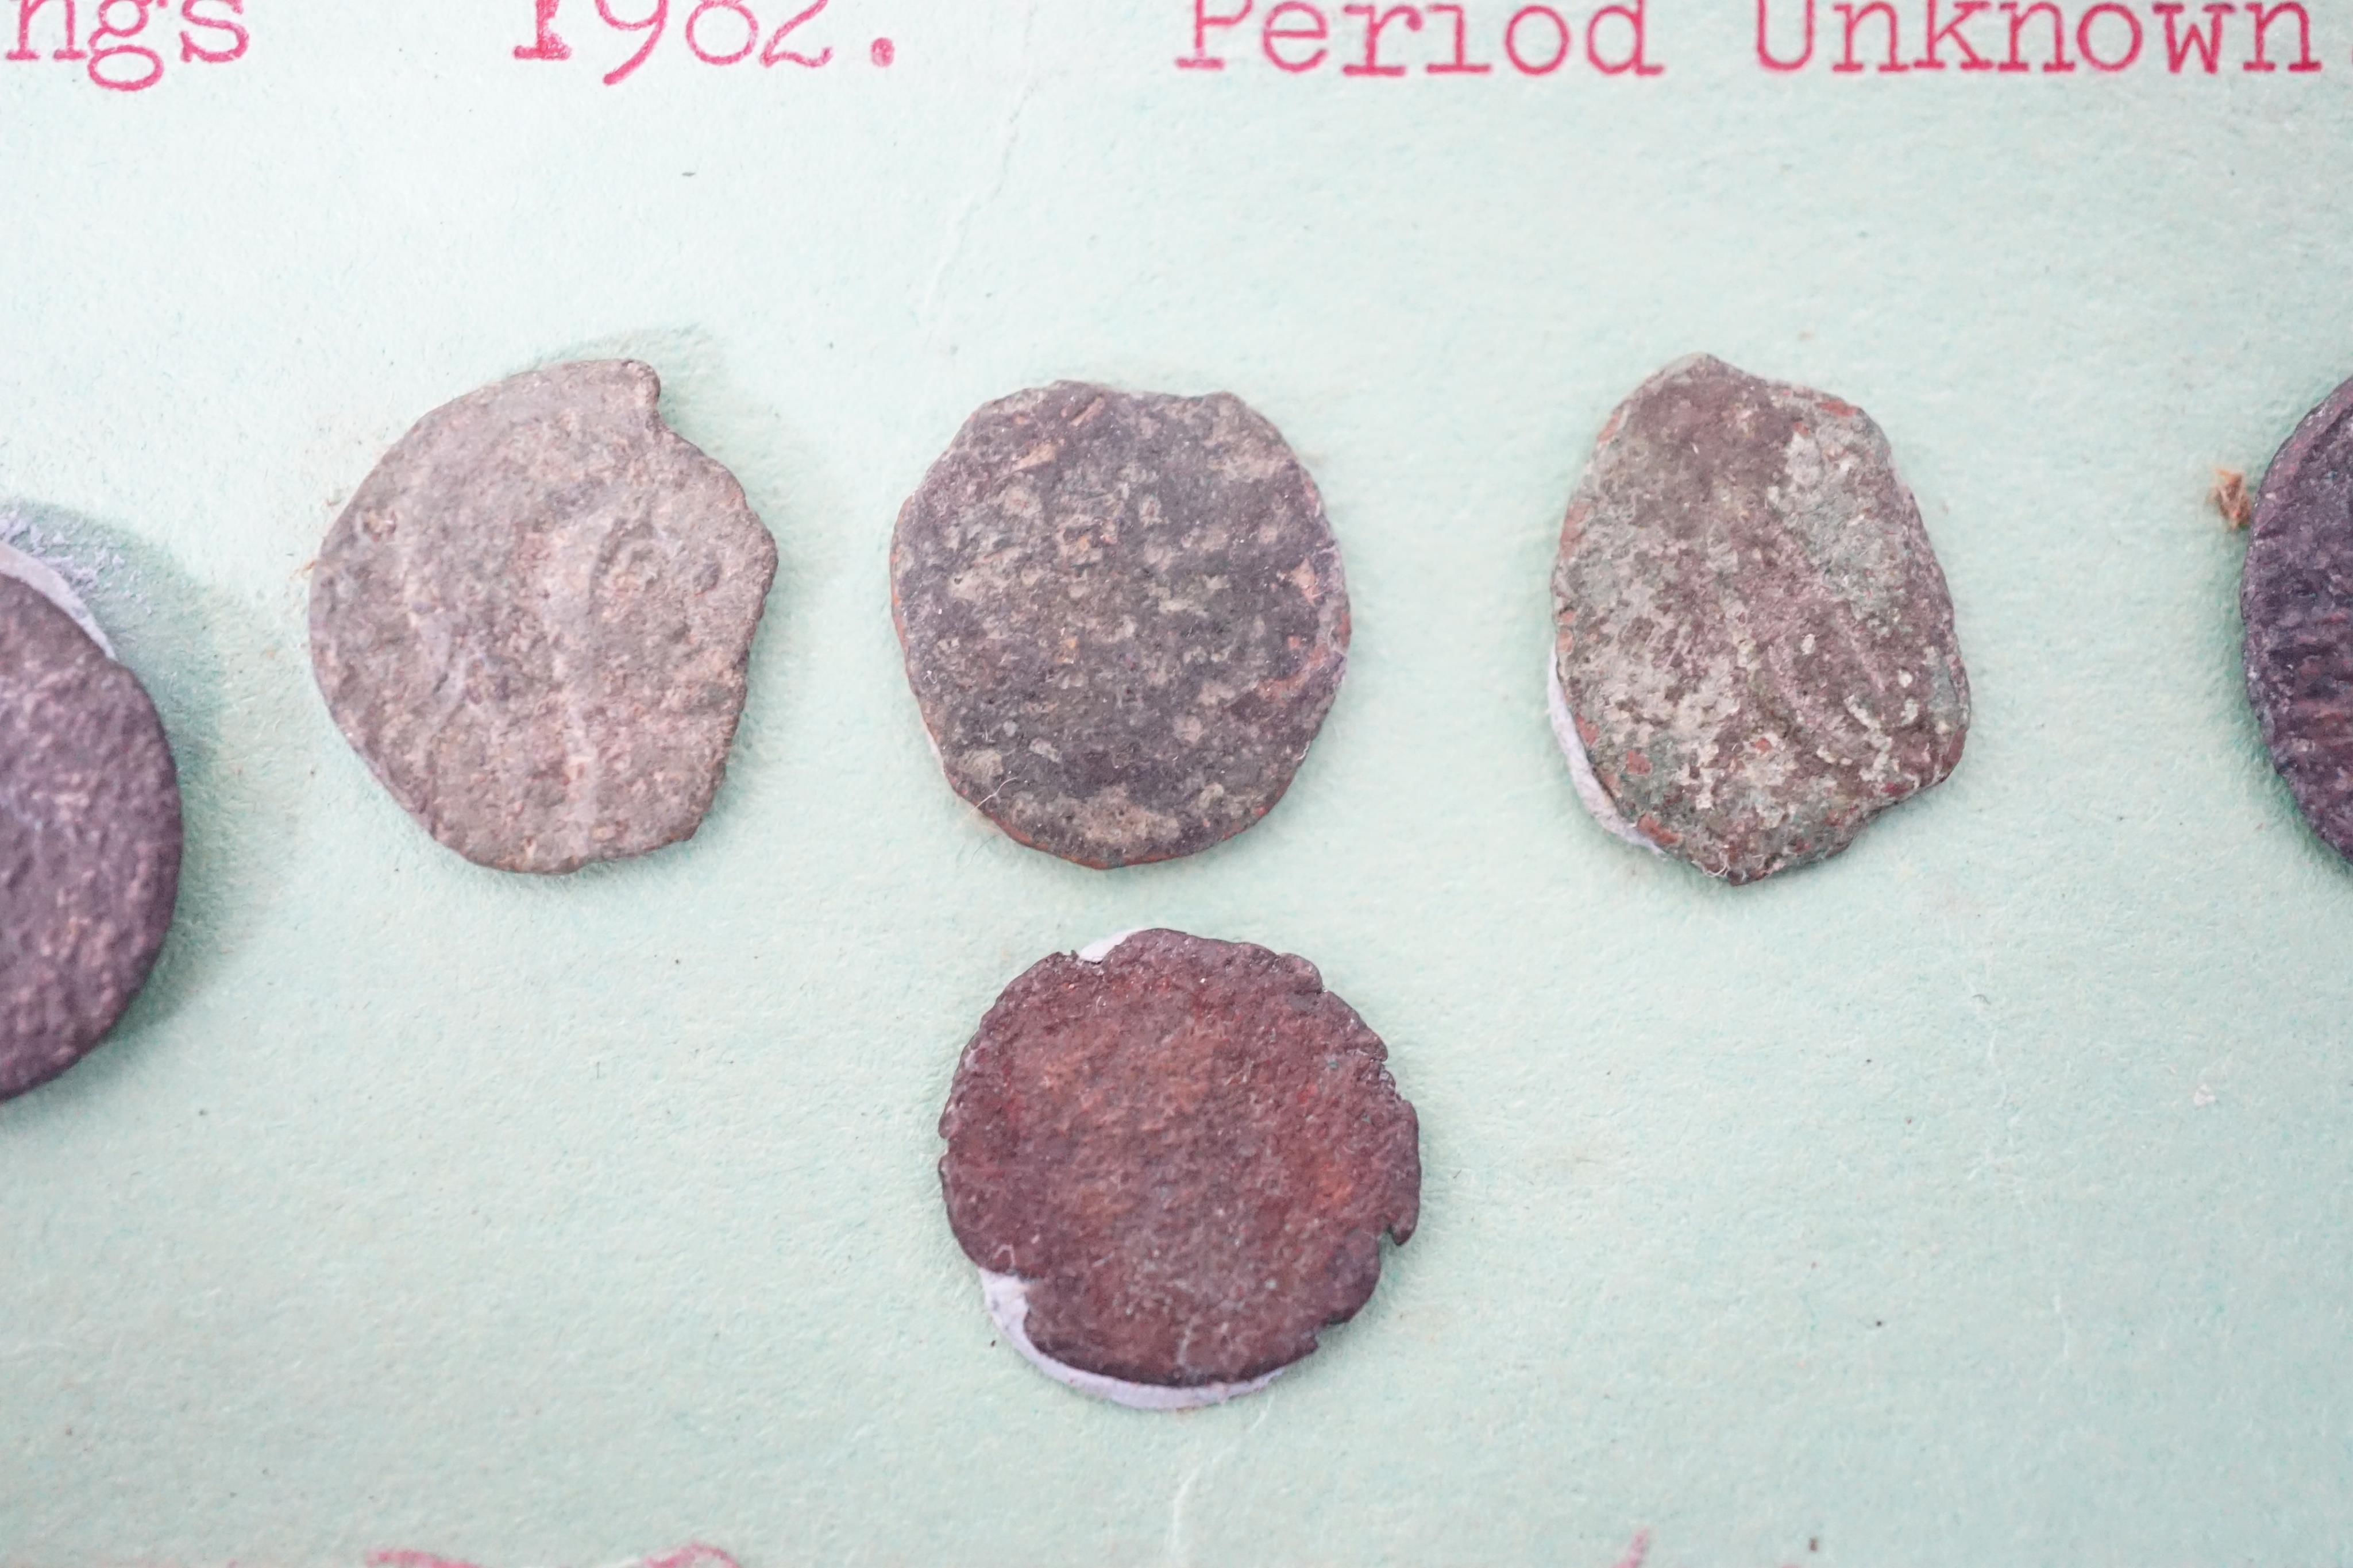 British Roman coinage, including Claudius II Gothicus AE Antoninianus, VF, most in poor condition and detectorist finds